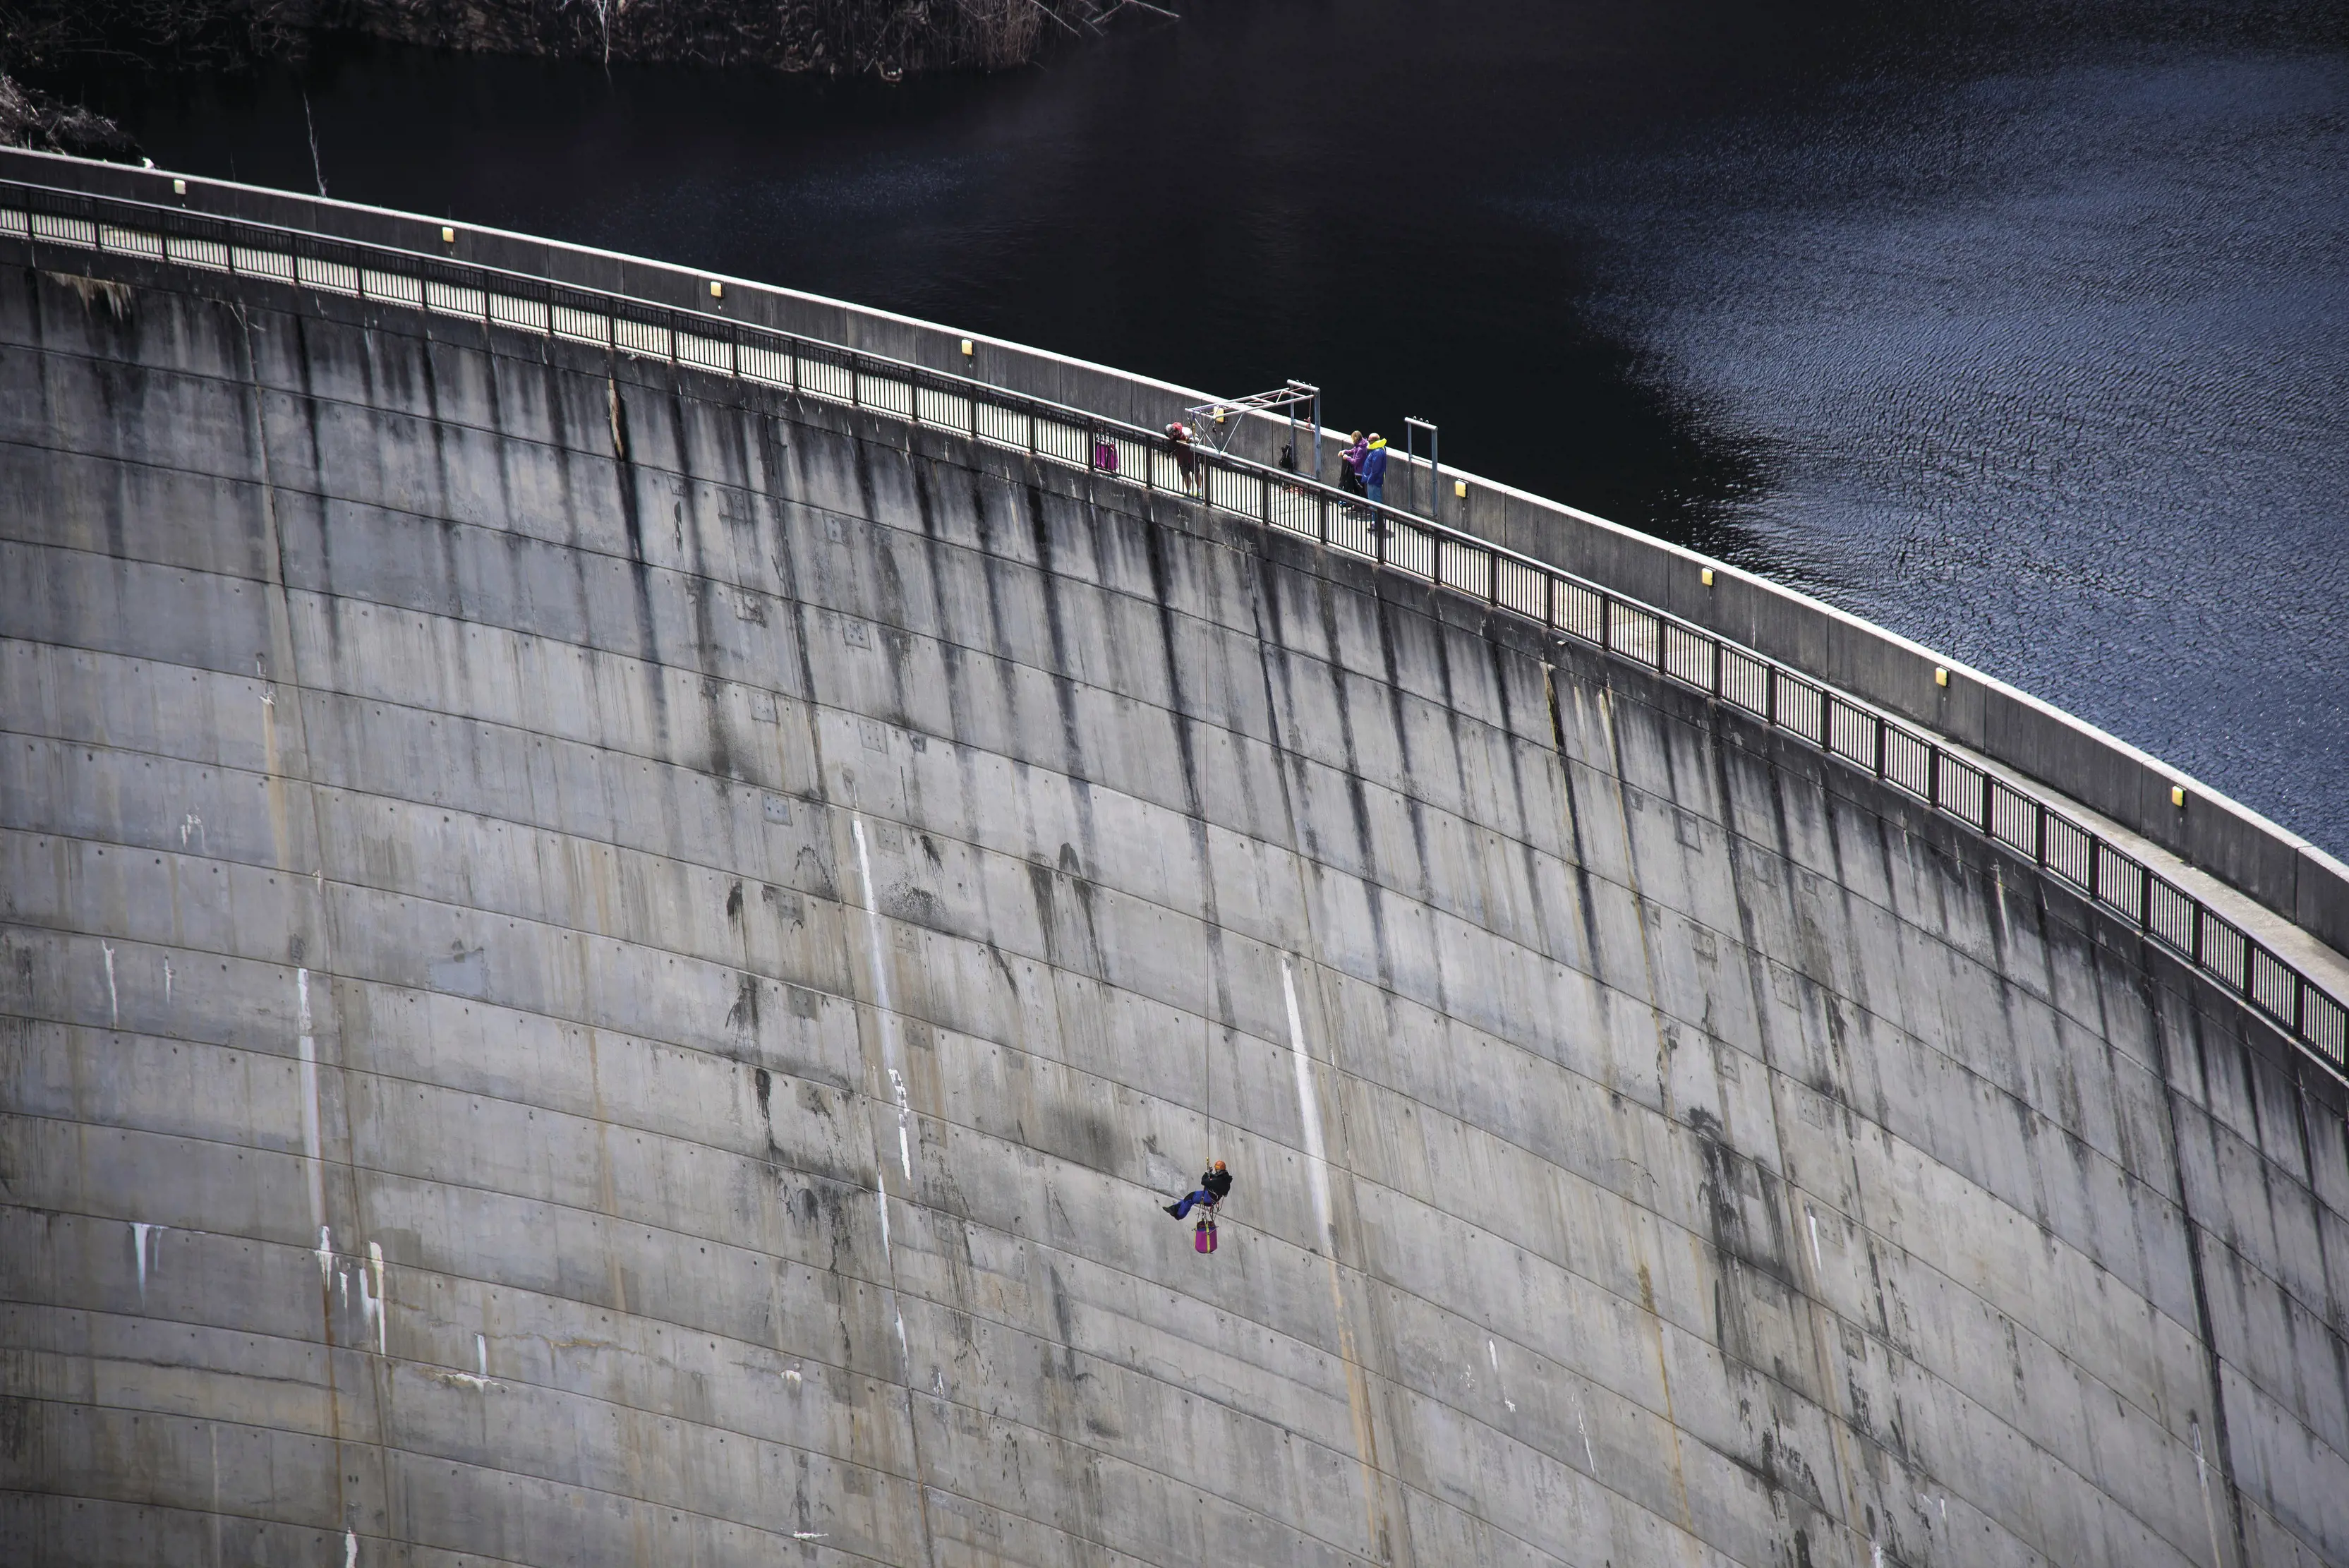 Jaw Dropping aerial image of a person abseiling down Gordon Dam - Aardvark Adventures.